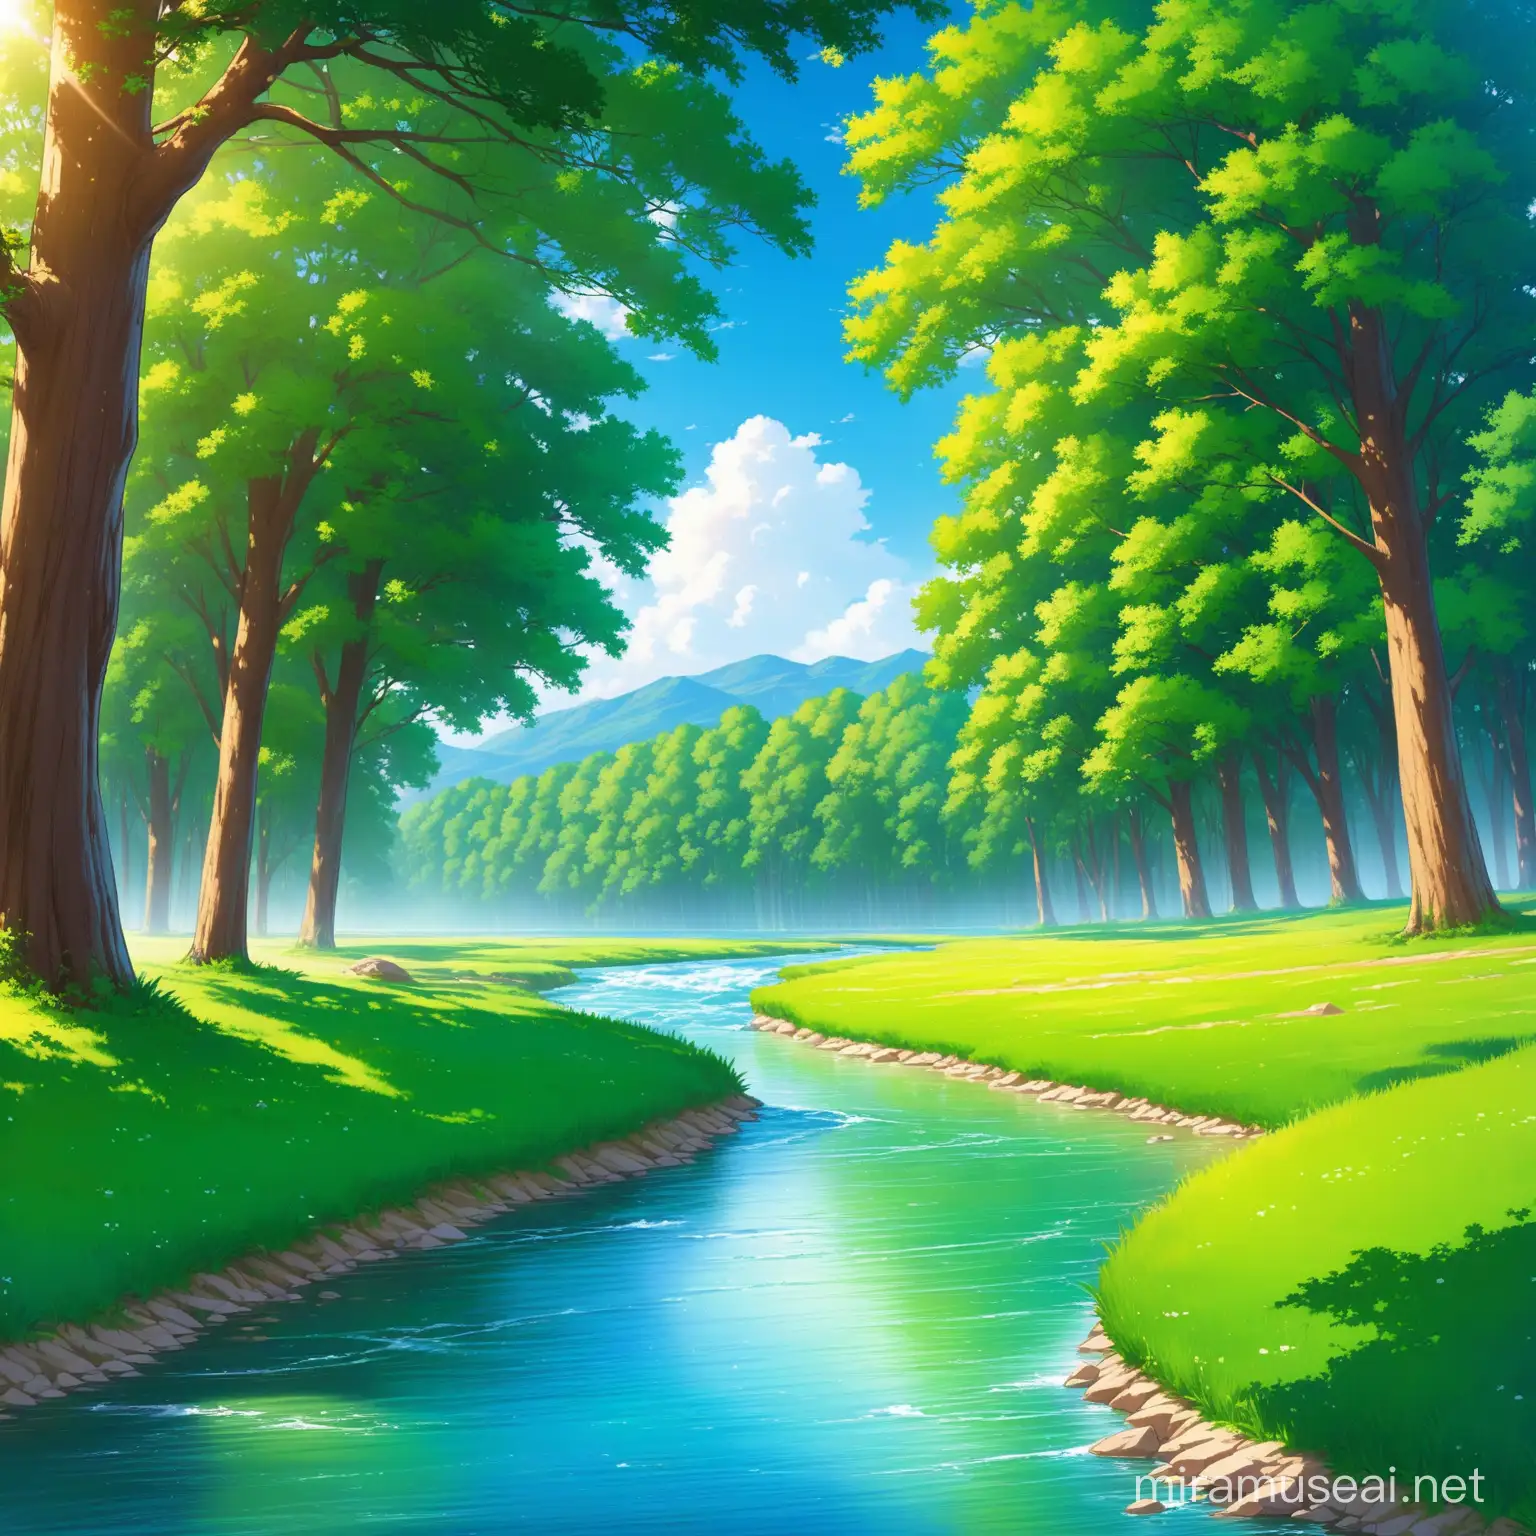 Tranquil Natural Park Landscape with Flowing River and Towering Trees